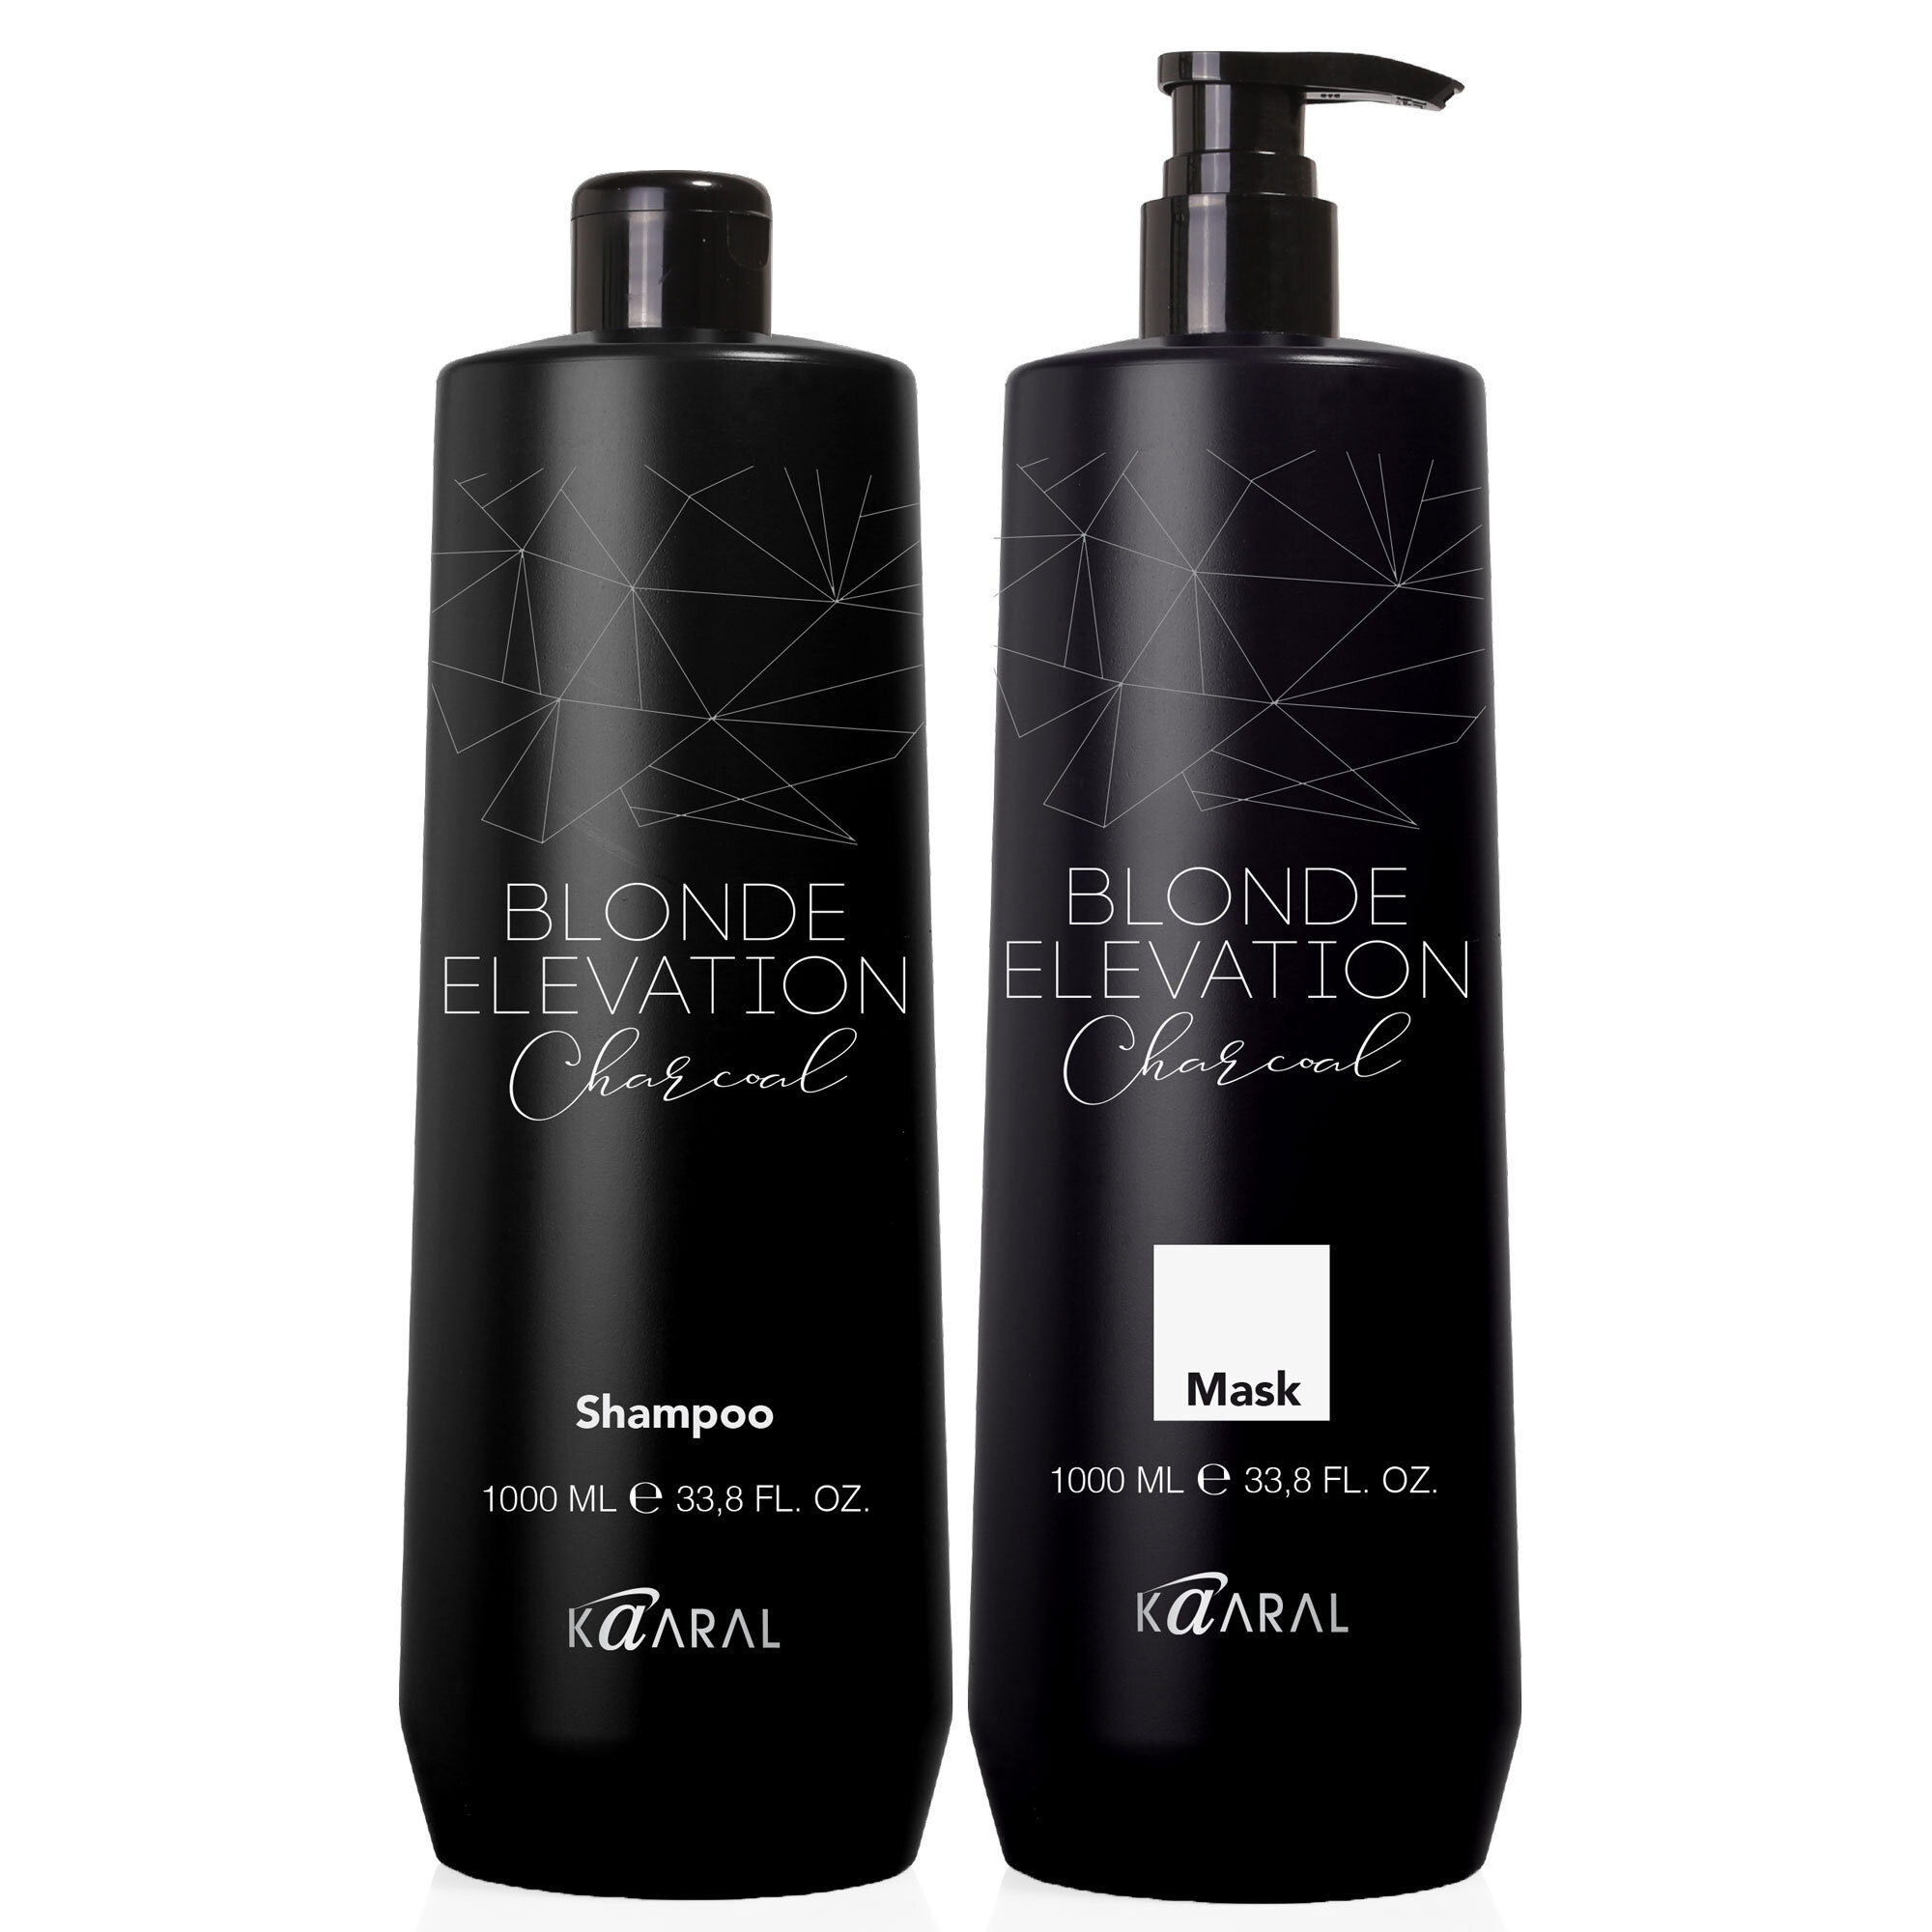 Kaaral Blonde Elevation Charcoal Shampoo Conditioner Liter Duo